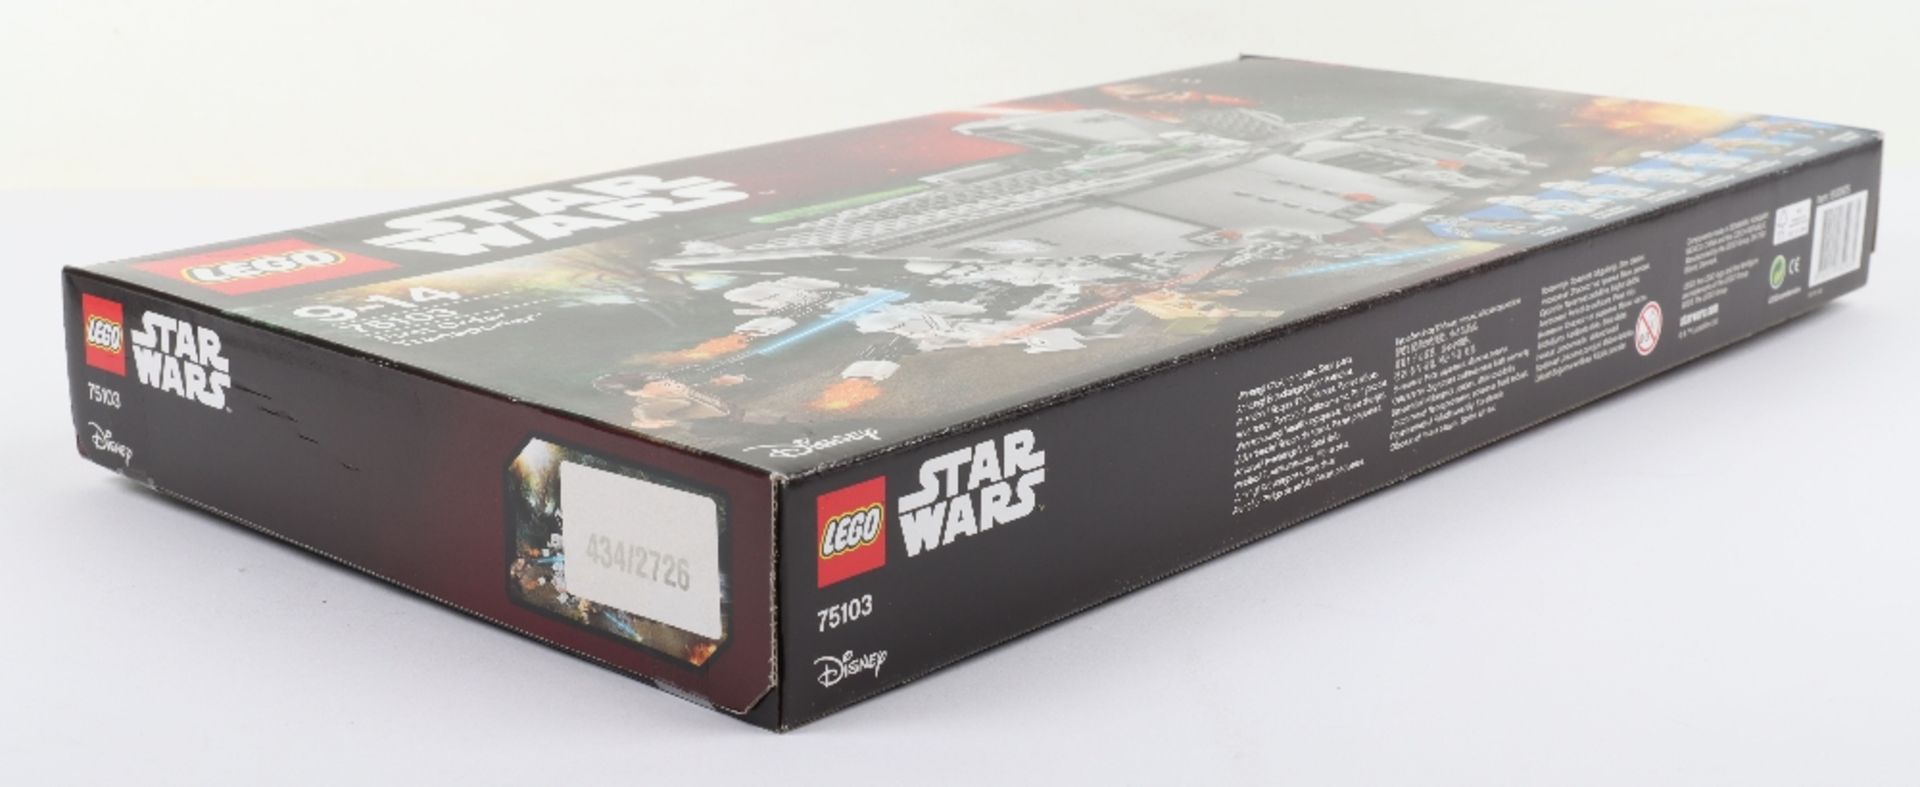 Lego Star Wars 75103 and 5002948 sealed boxed sets - Image 6 of 11